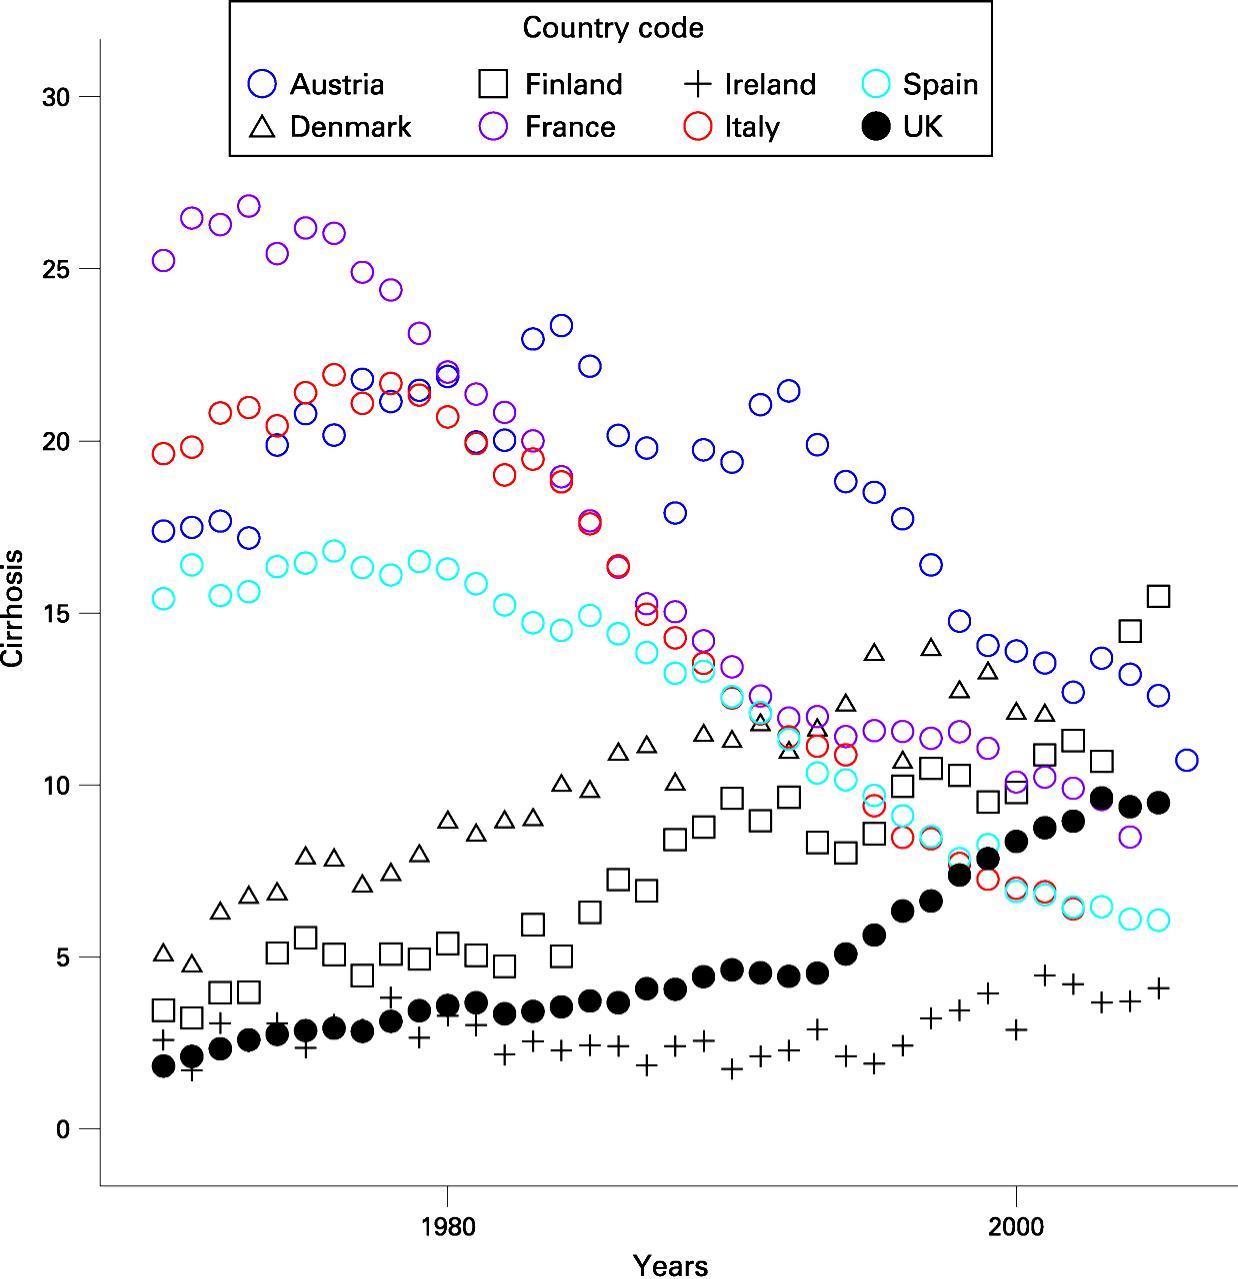 Over the last 30 years standardised cirrhosis mortality rates (cirrhosis deaths/100 000 under the age of 64 years) have